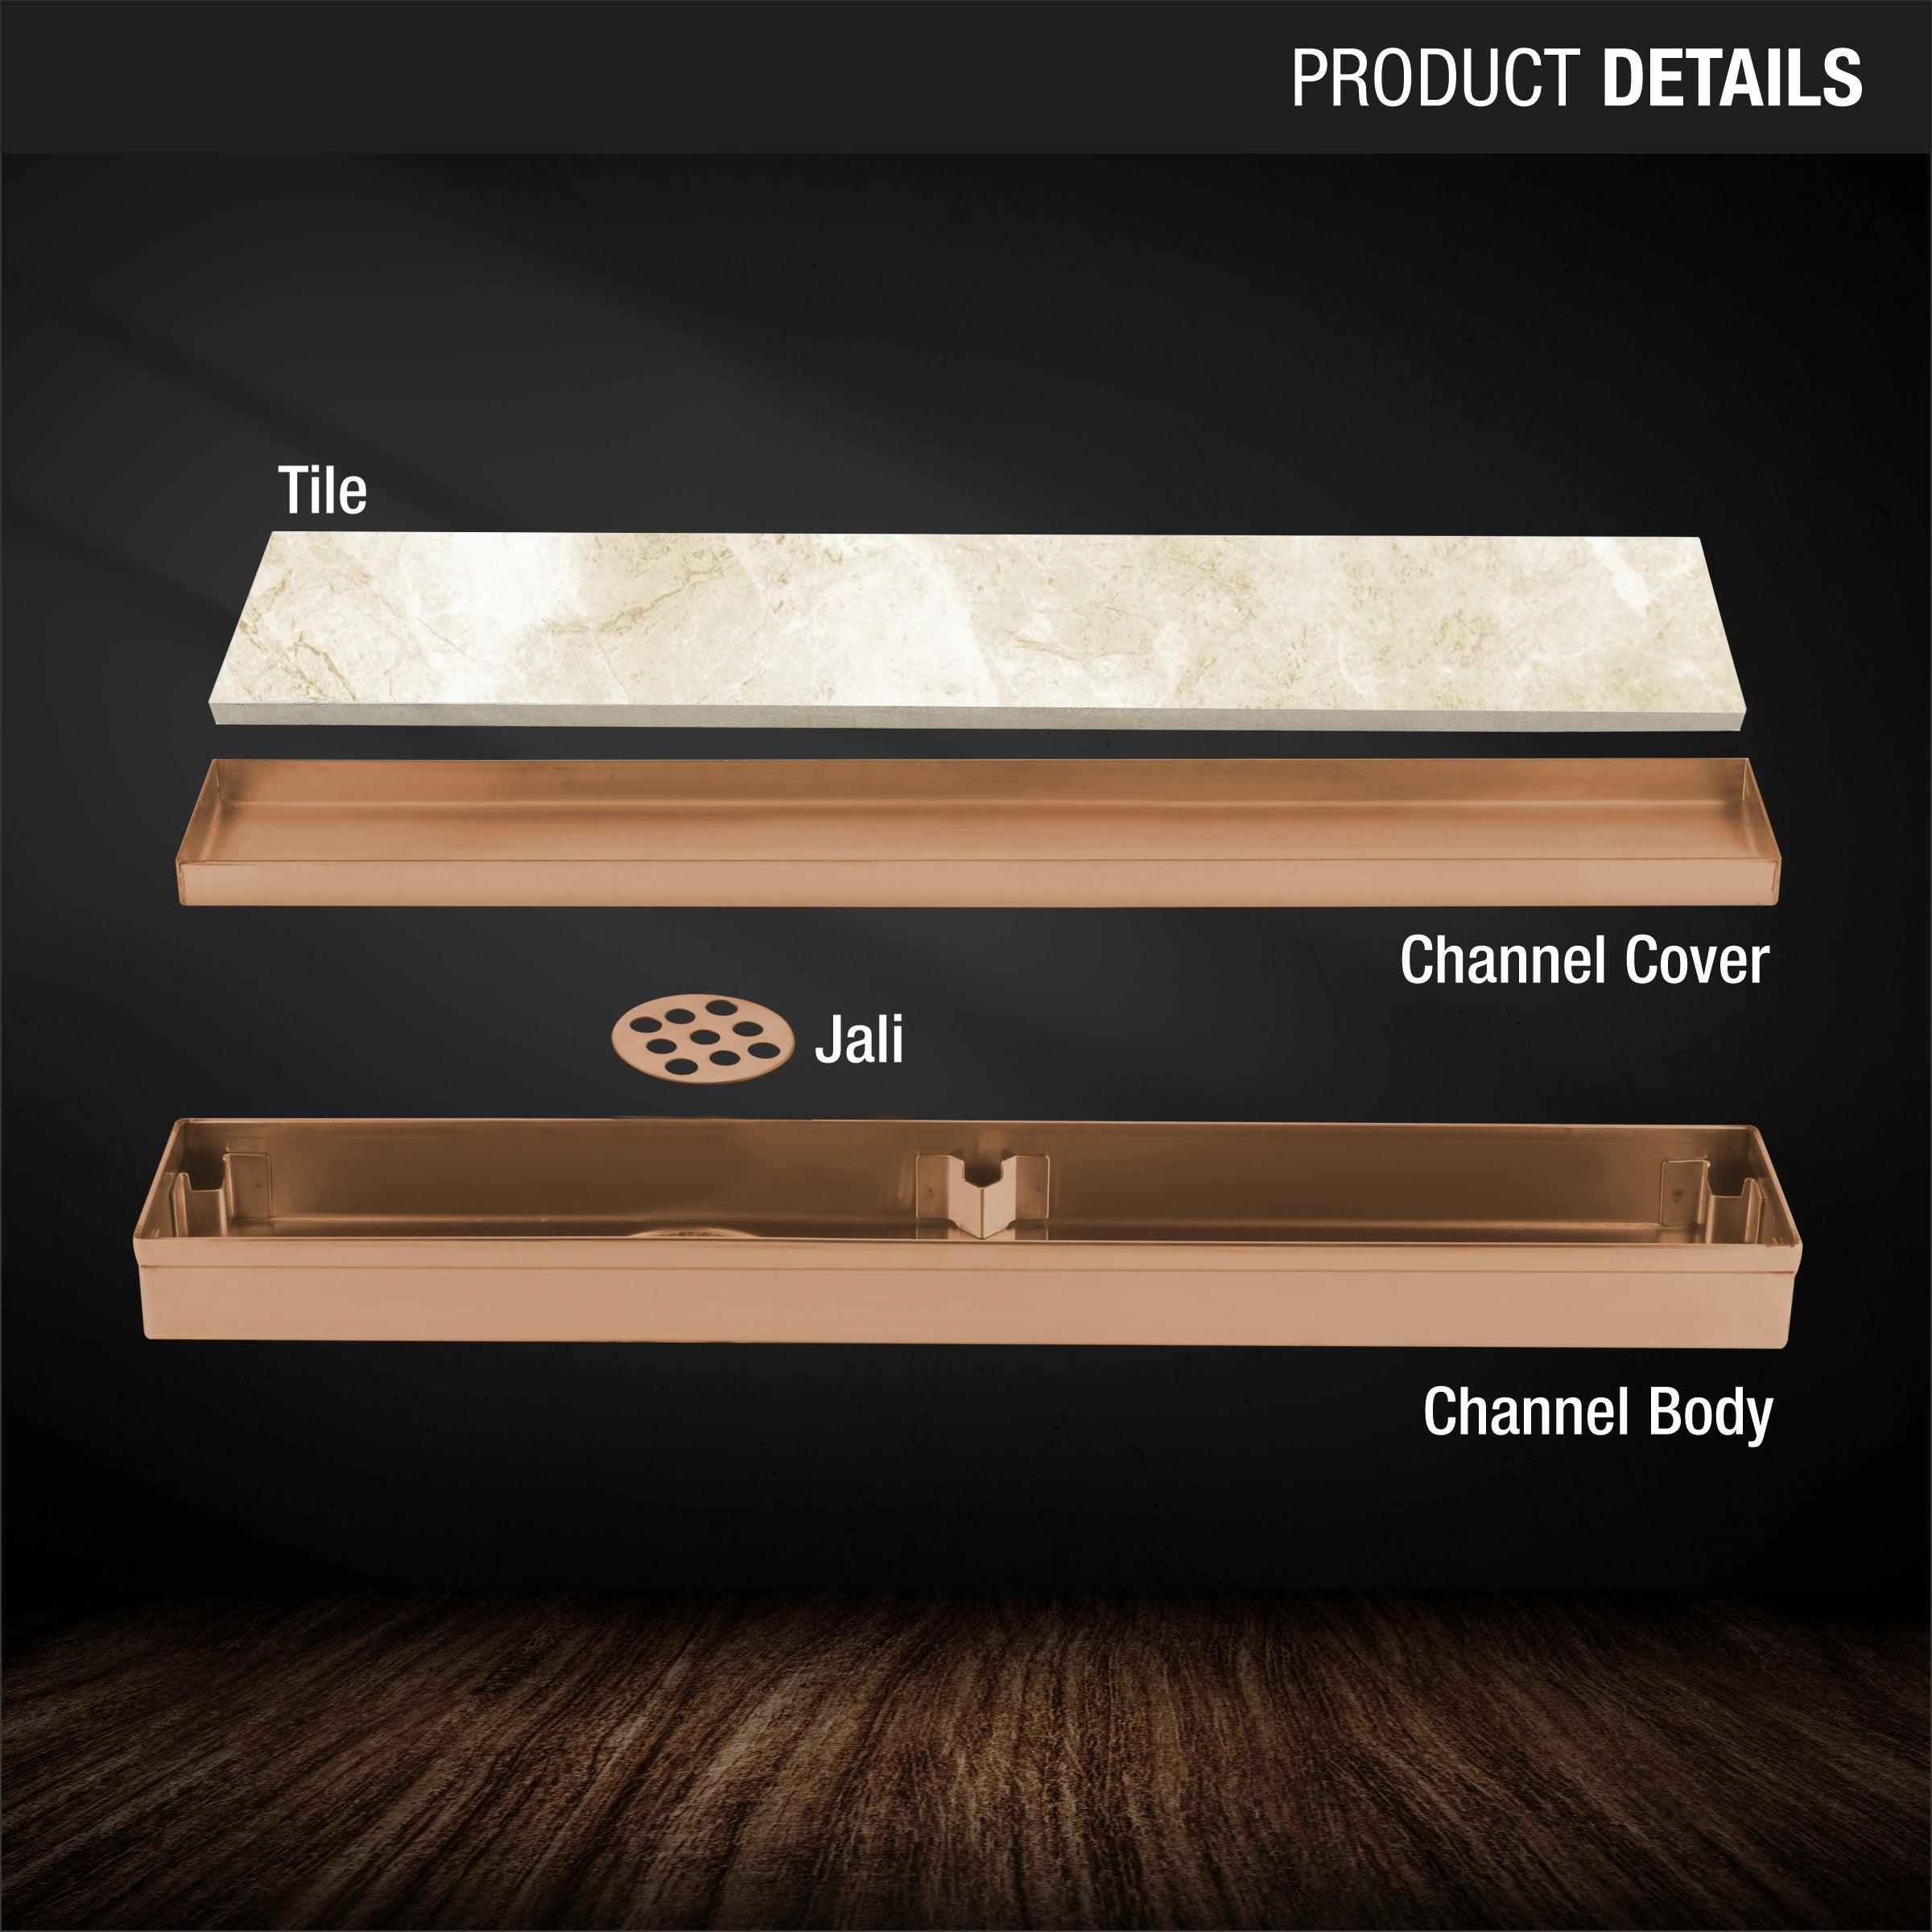 Tile Insert Shower Drain Channel - Yellow Gold (12 x 2 Inches) product details